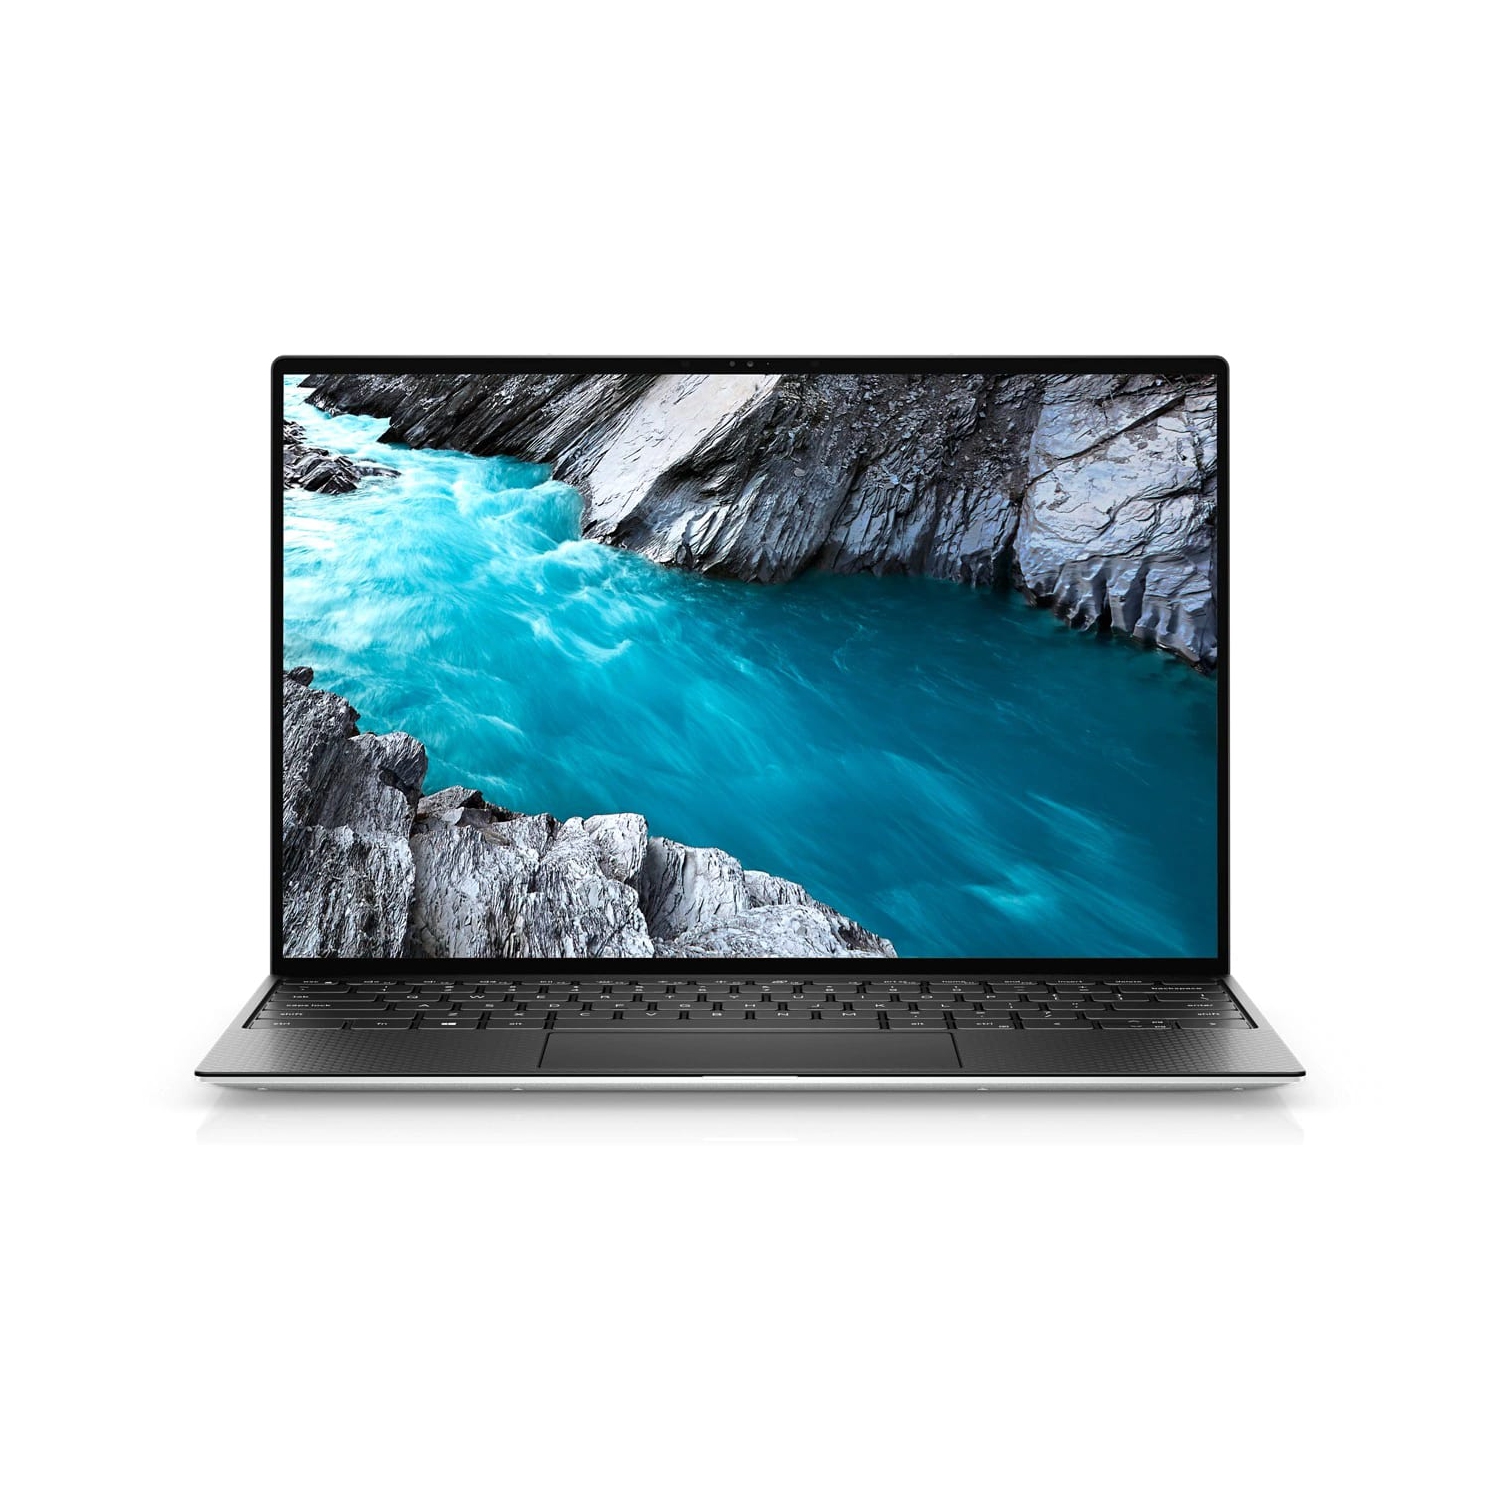 Refurbished (Excellent) - Dell XPS 13 9310 Laptop (2020) | 13.4" 4K Touch | Core i5 - 256GB SSD - 16GB RAM | 4 Cores @ 4.2 GHz - 11th Gen CPU Certified Refurbished